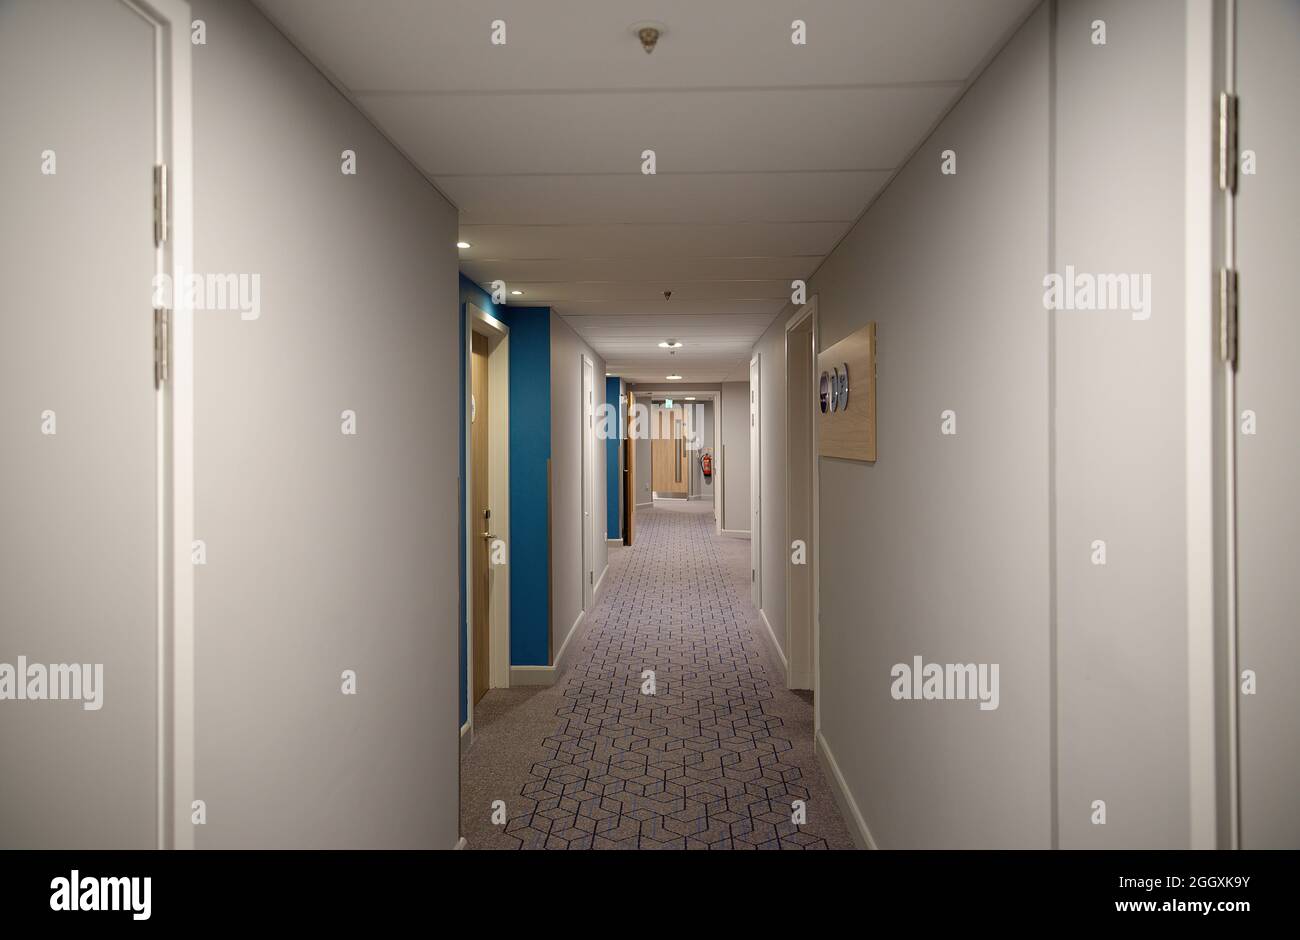 A dimly lit hotel corridor with plain walls and a patterned carpet. Stock Photo